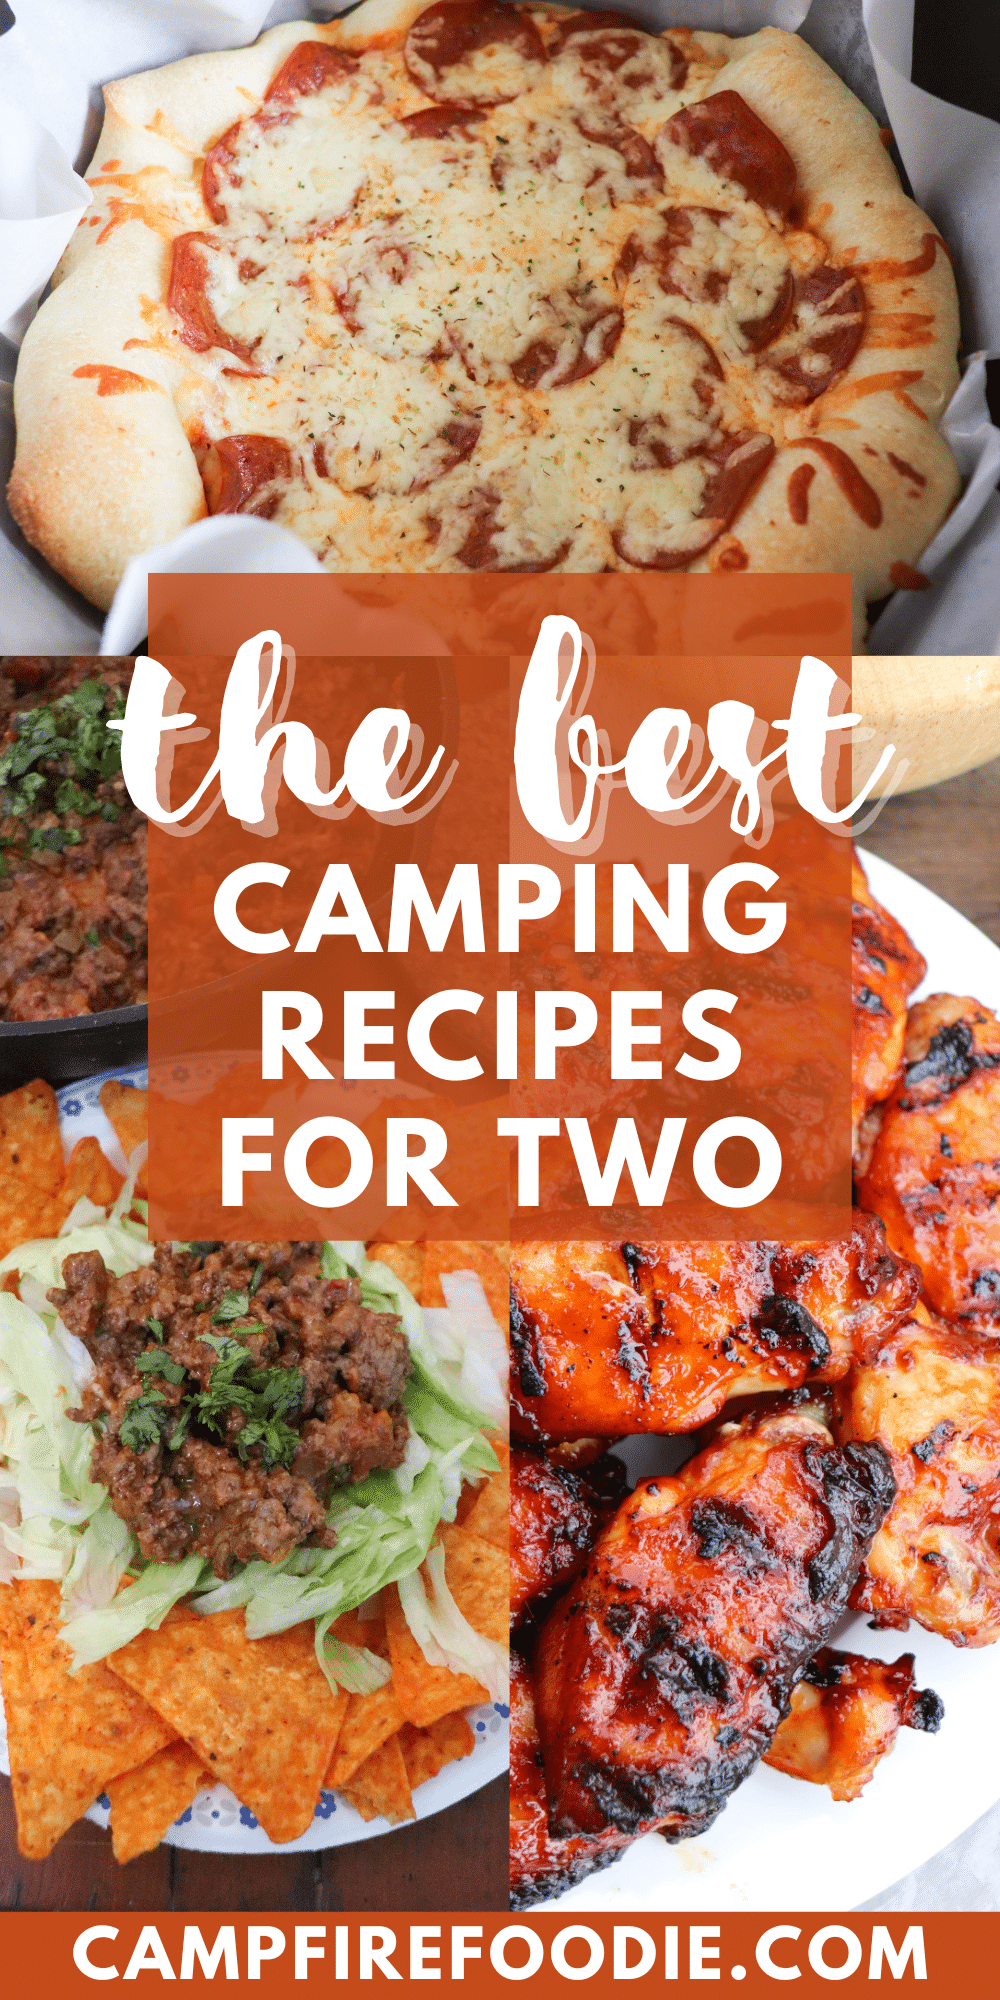 https://campfirefoodie.com/wp-content/uploads/2023/04/Campfire-Foodie-Pinterest-7.png